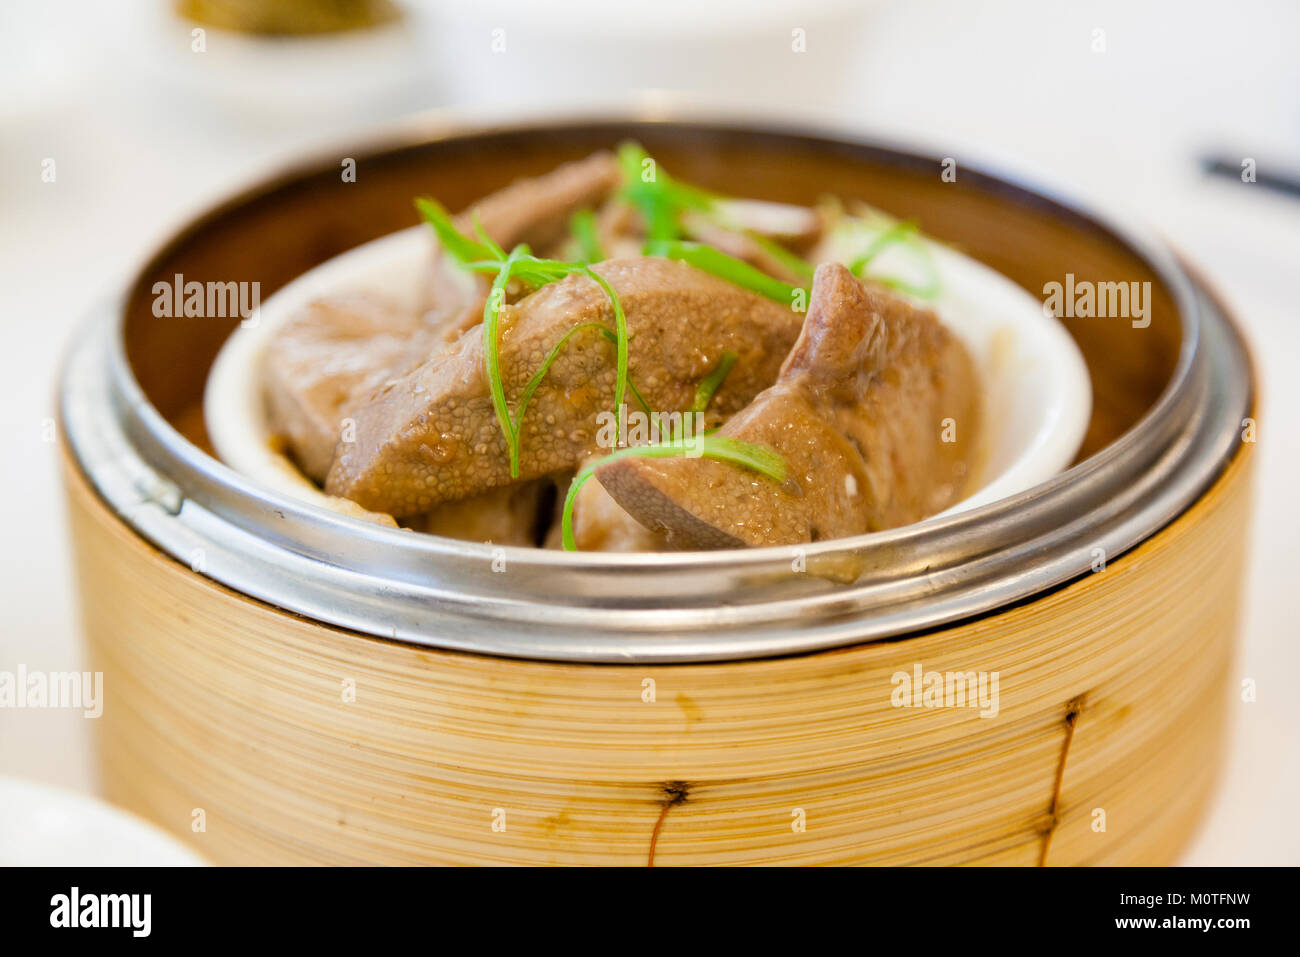 Braised pork liver dim sum in bamboo steamer is a popular dish in Cantonese restaurants in Hong Kong. Stock Photo